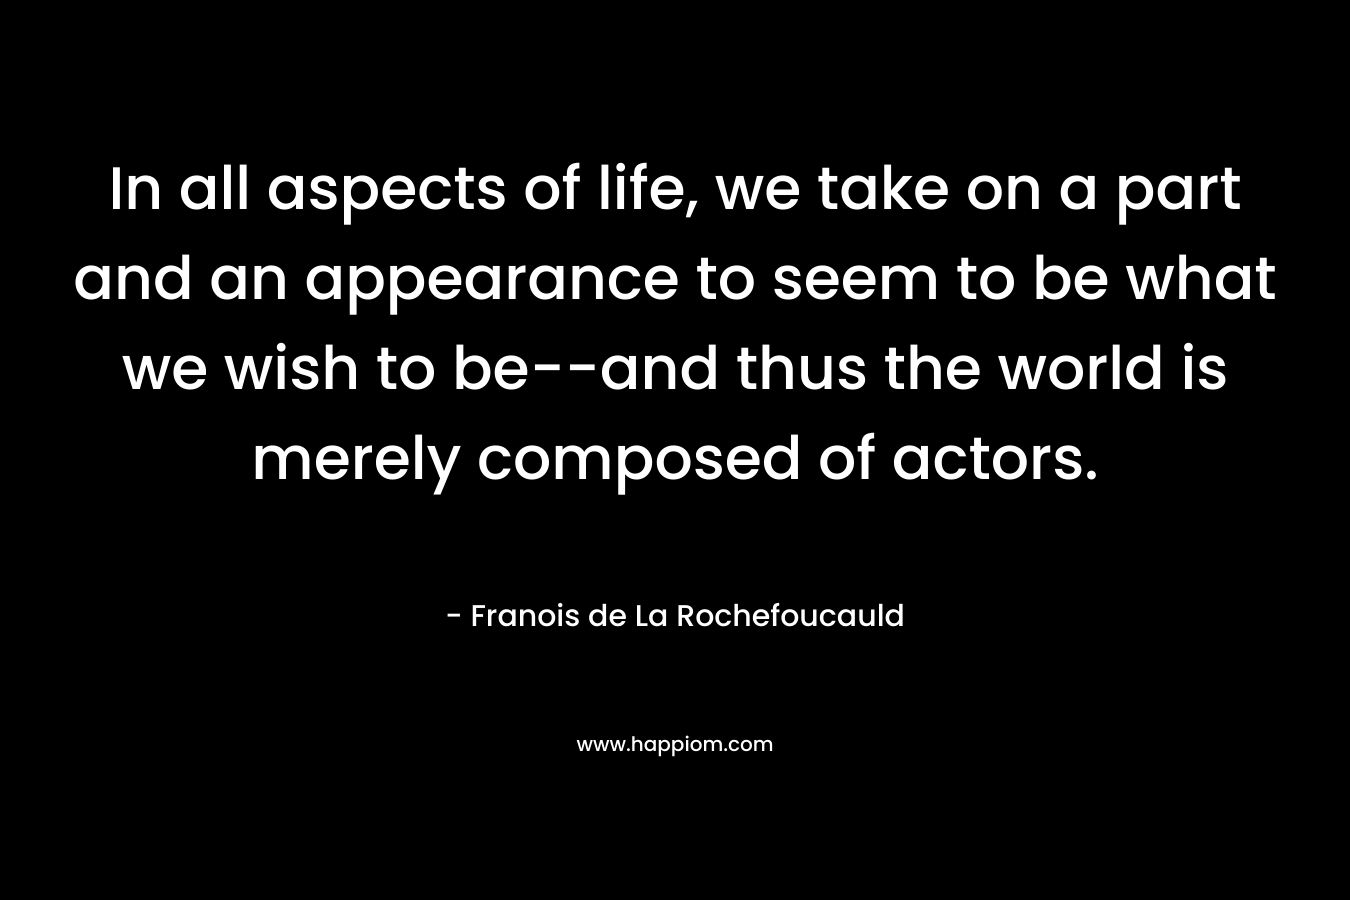 In all aspects of life, we take on a part and an appearance to seem to be what we wish to be--and thus the world is merely composed of actors.